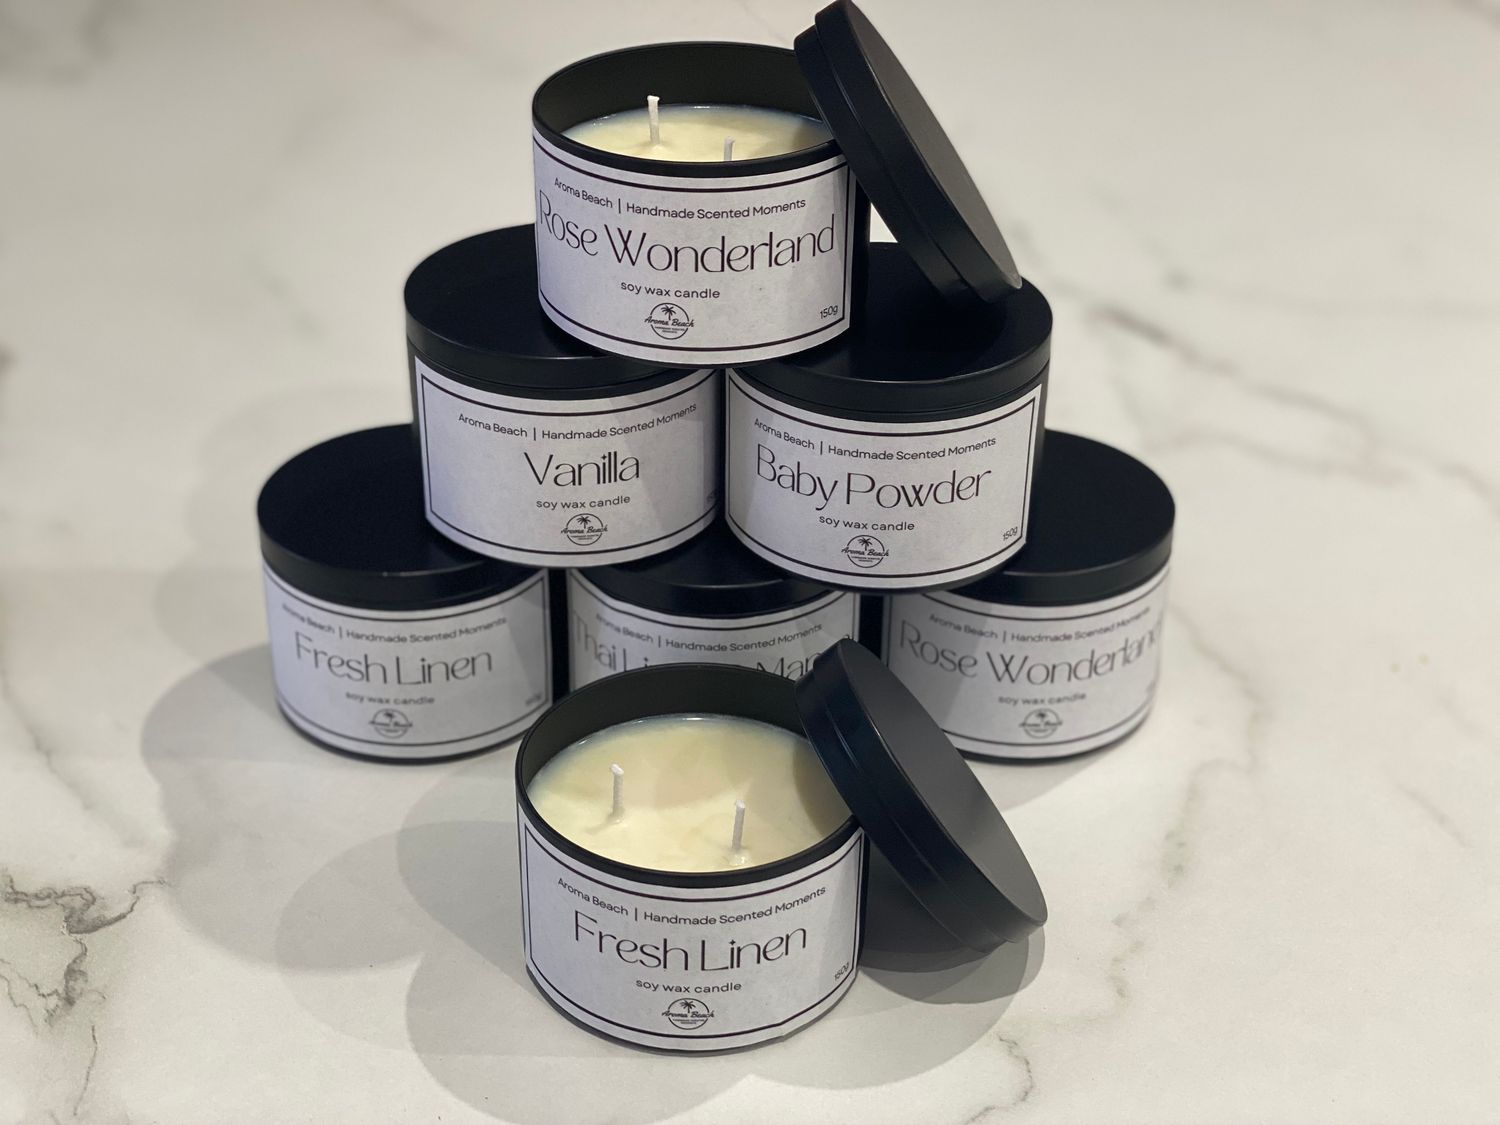 Highly Scented Soy Wax Candles 150g
£9.75